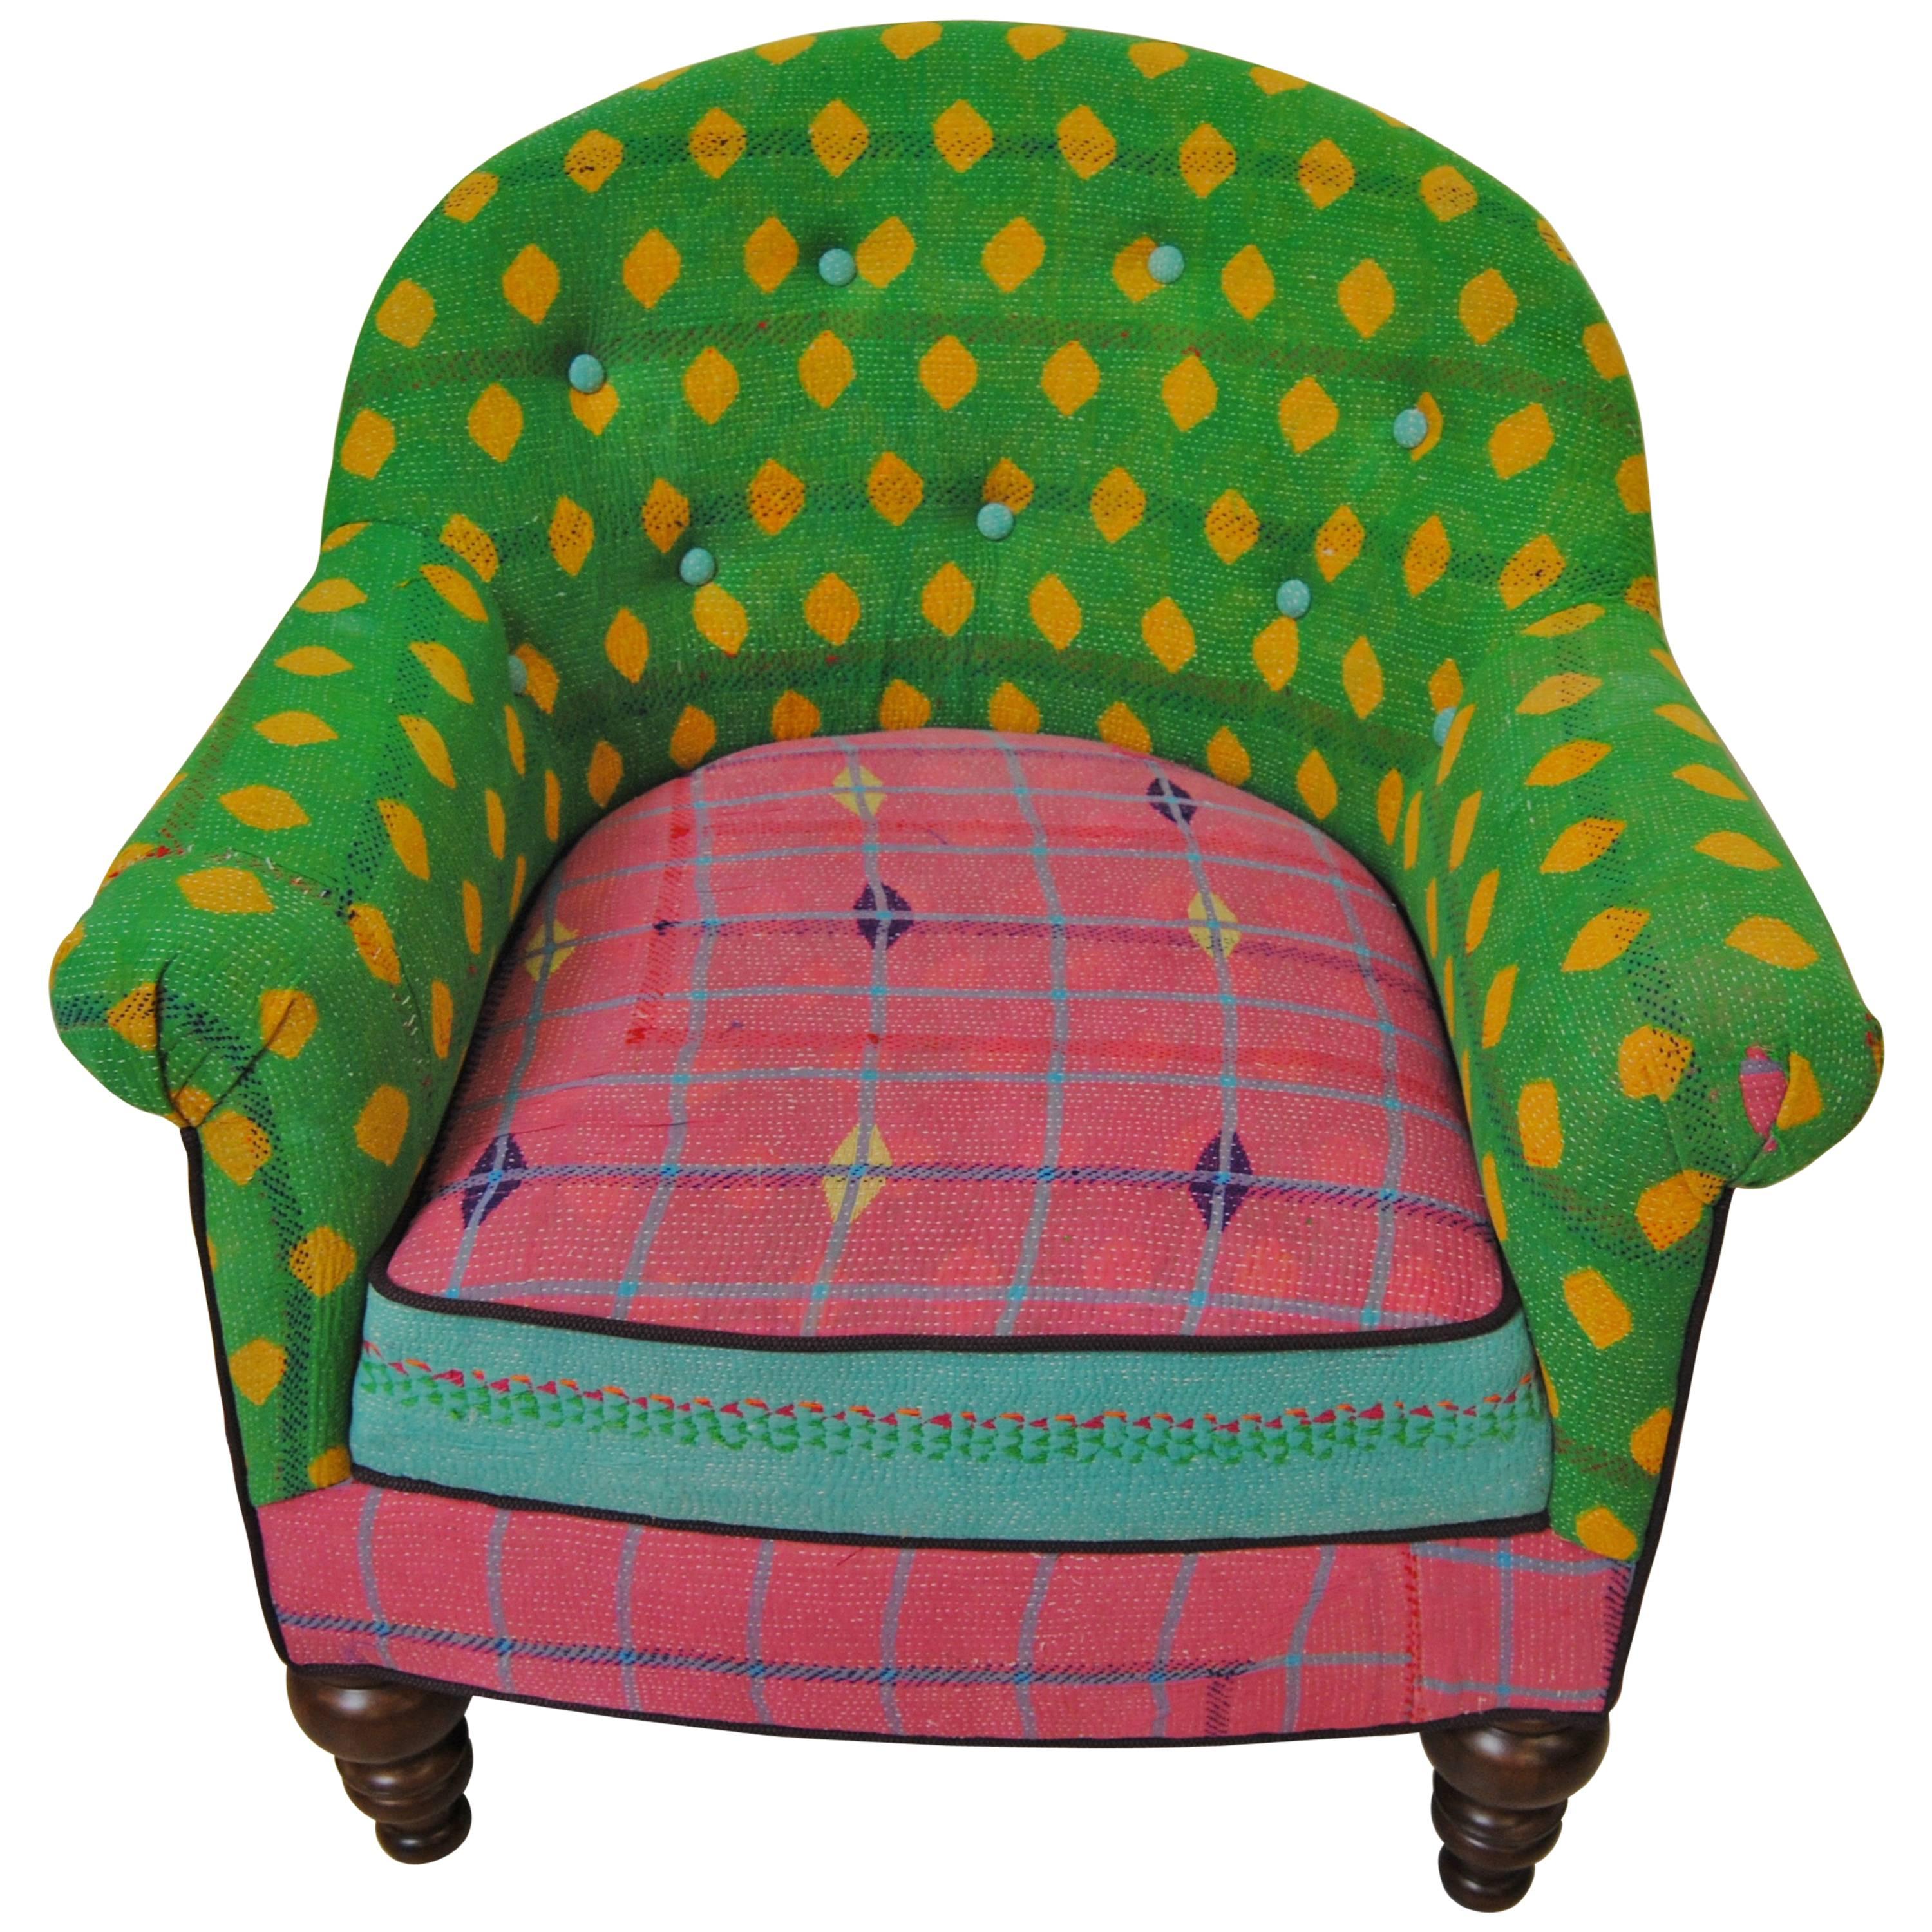 Vintage French Chair Newly Upholstered in Vintage Kantha Quilts from India